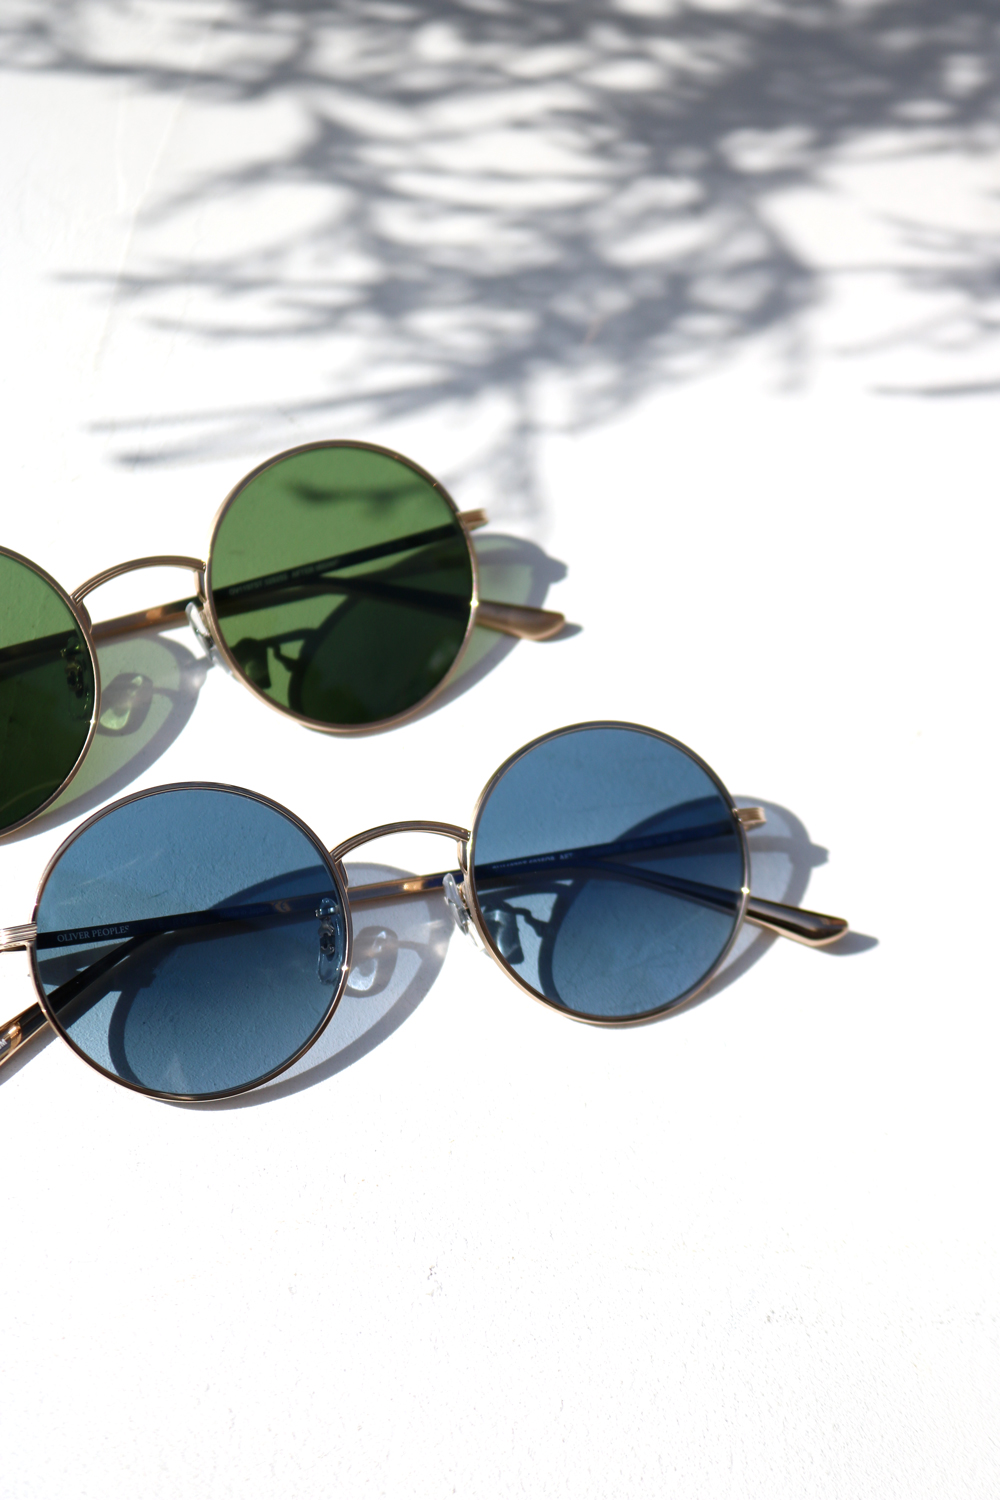 OLIVER PEOPLES×THE ROW サングラス uniquedesign.ma